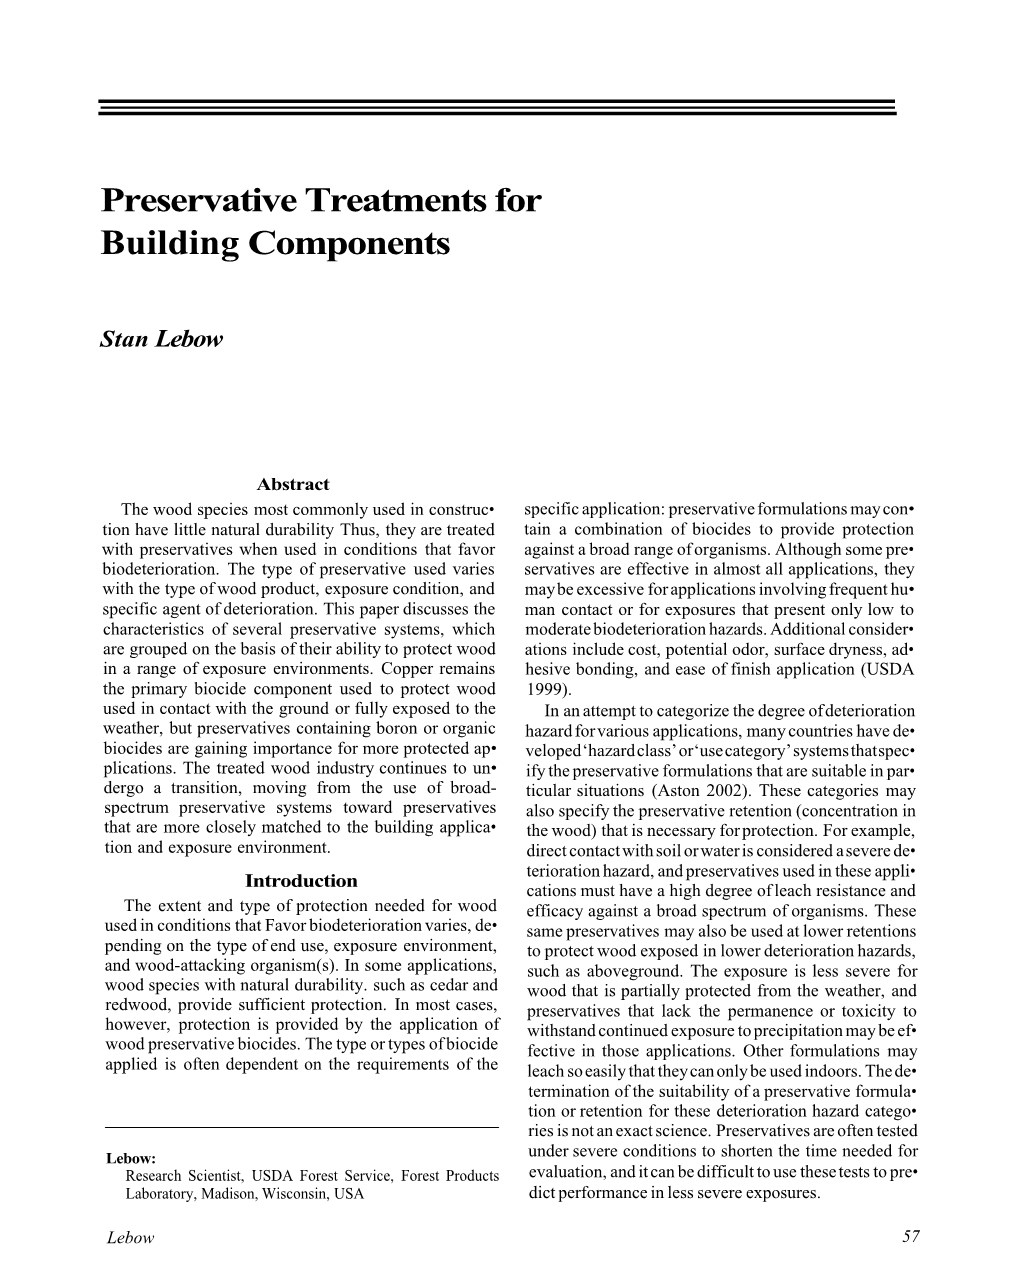 Preservative Treatments for Building Components